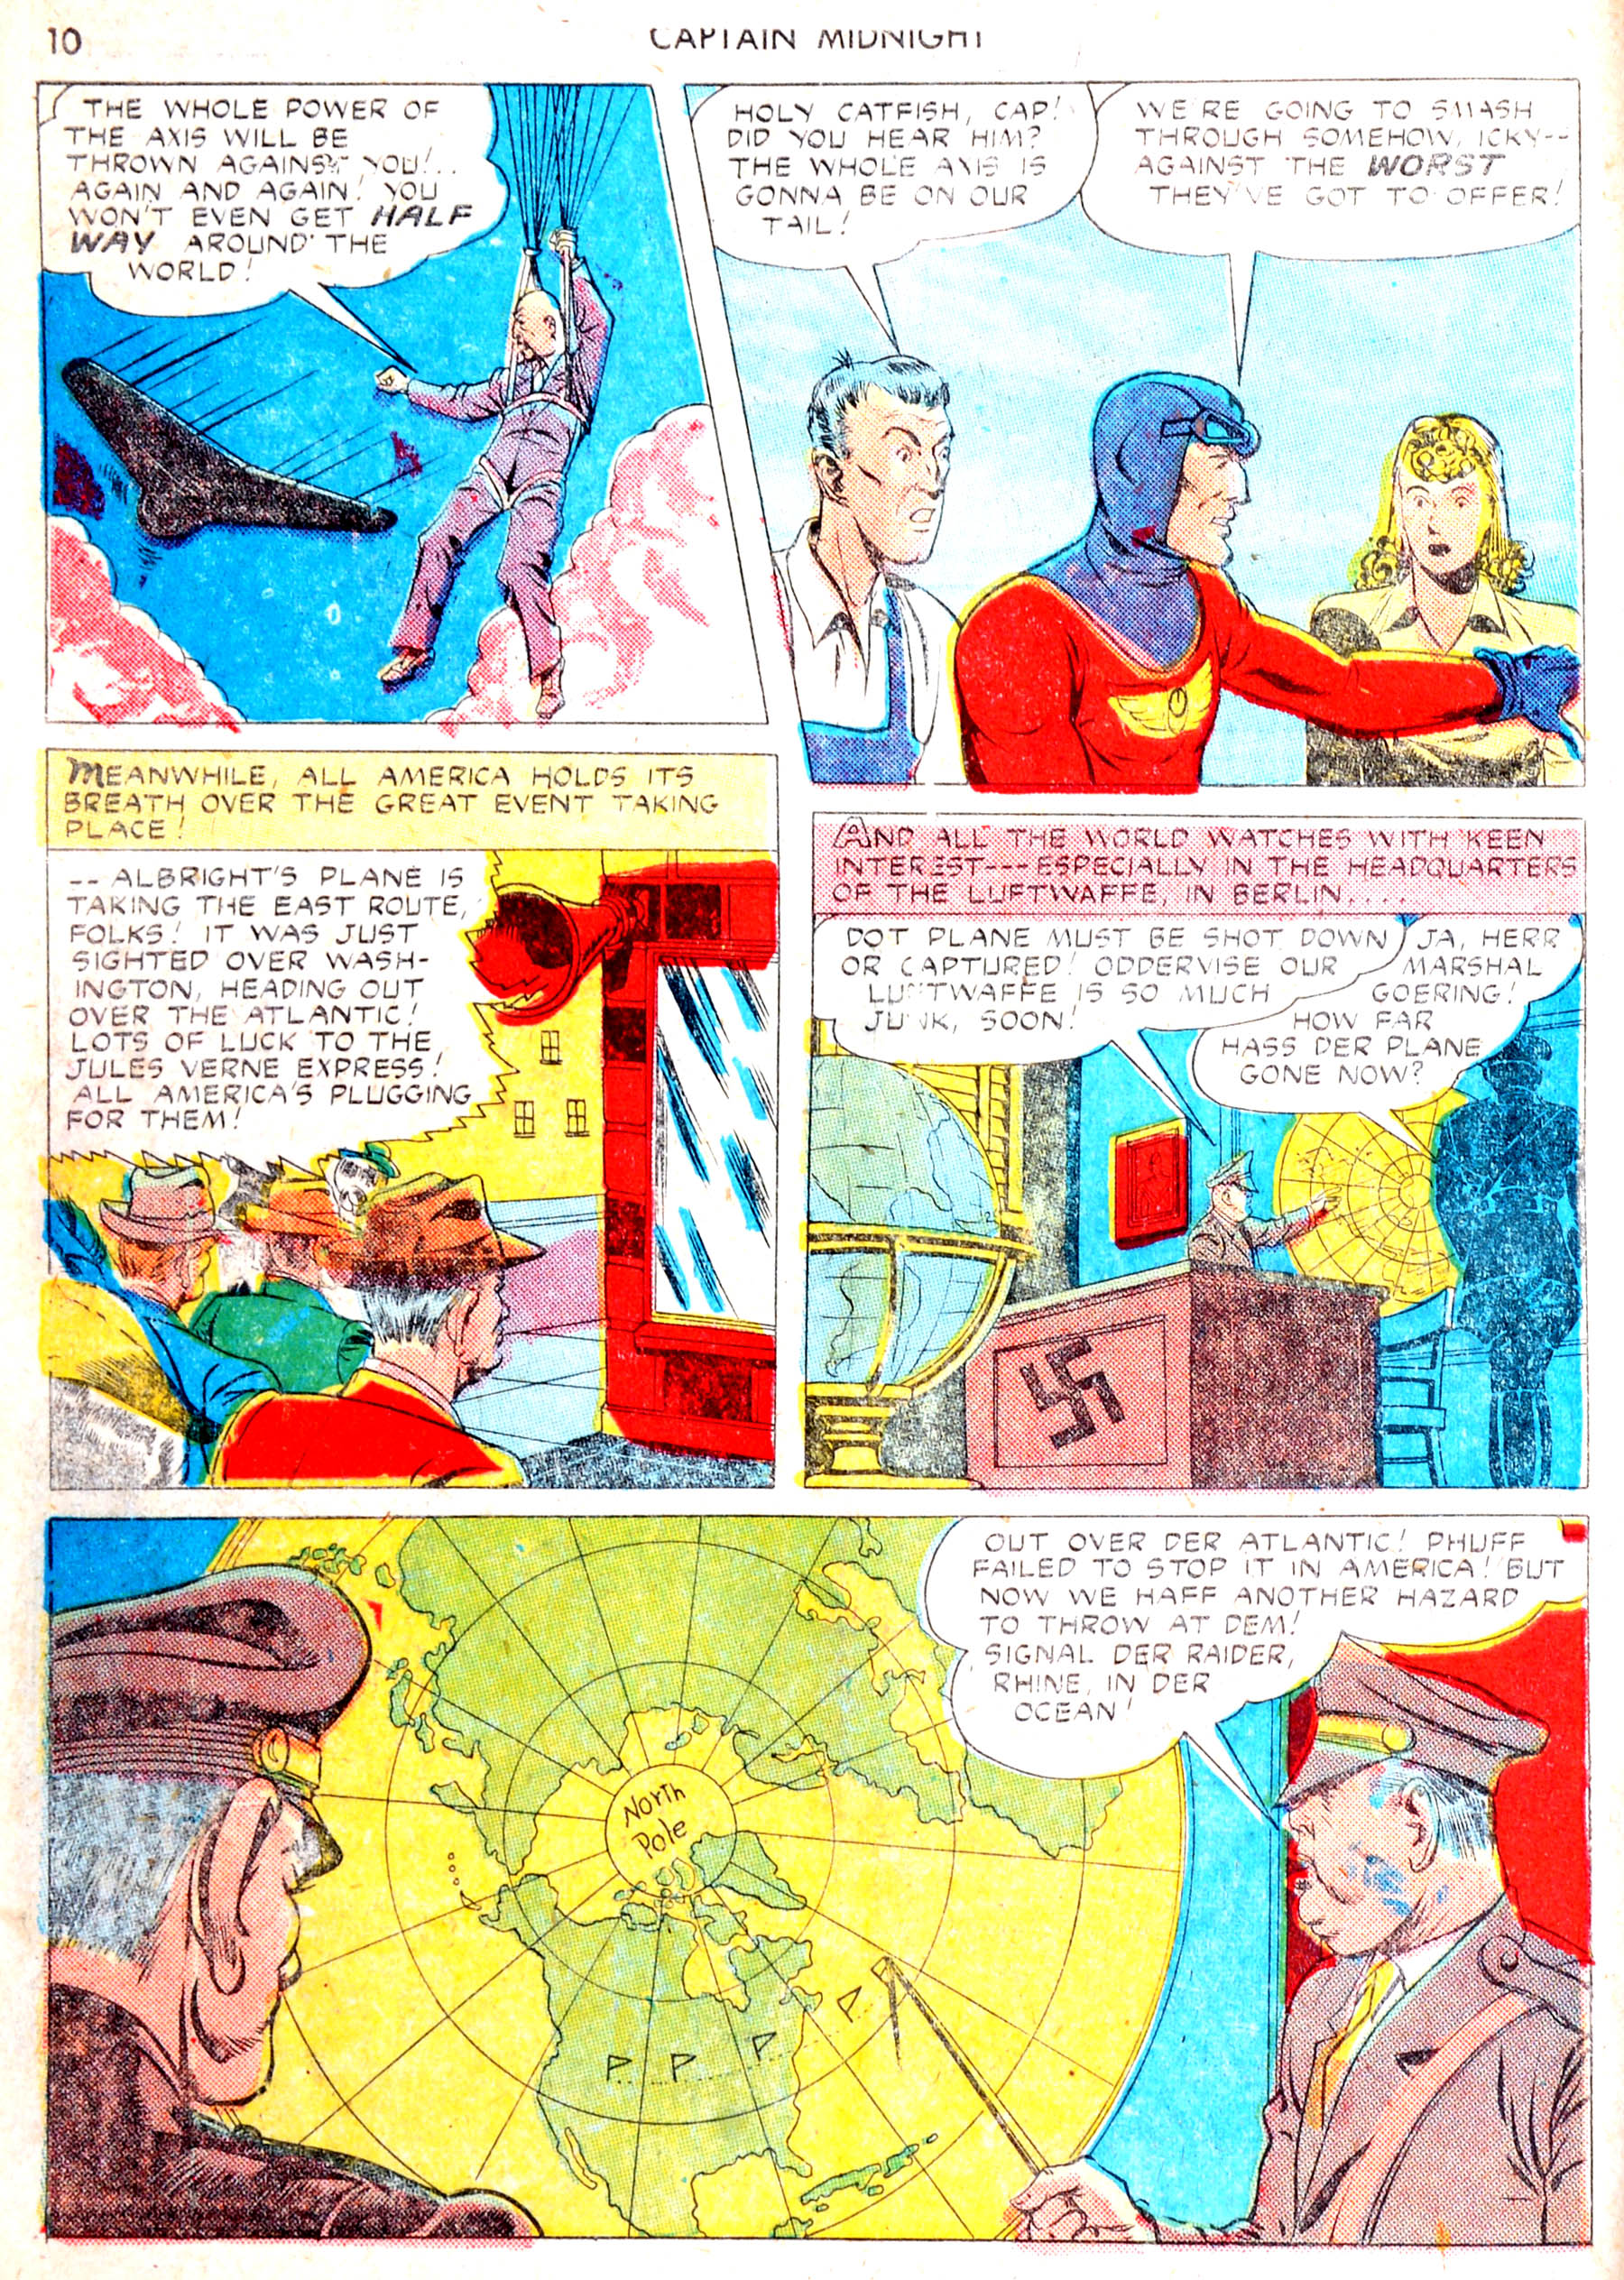 Read online Captain Midnight (1942) comic -  Issue #13 - 10